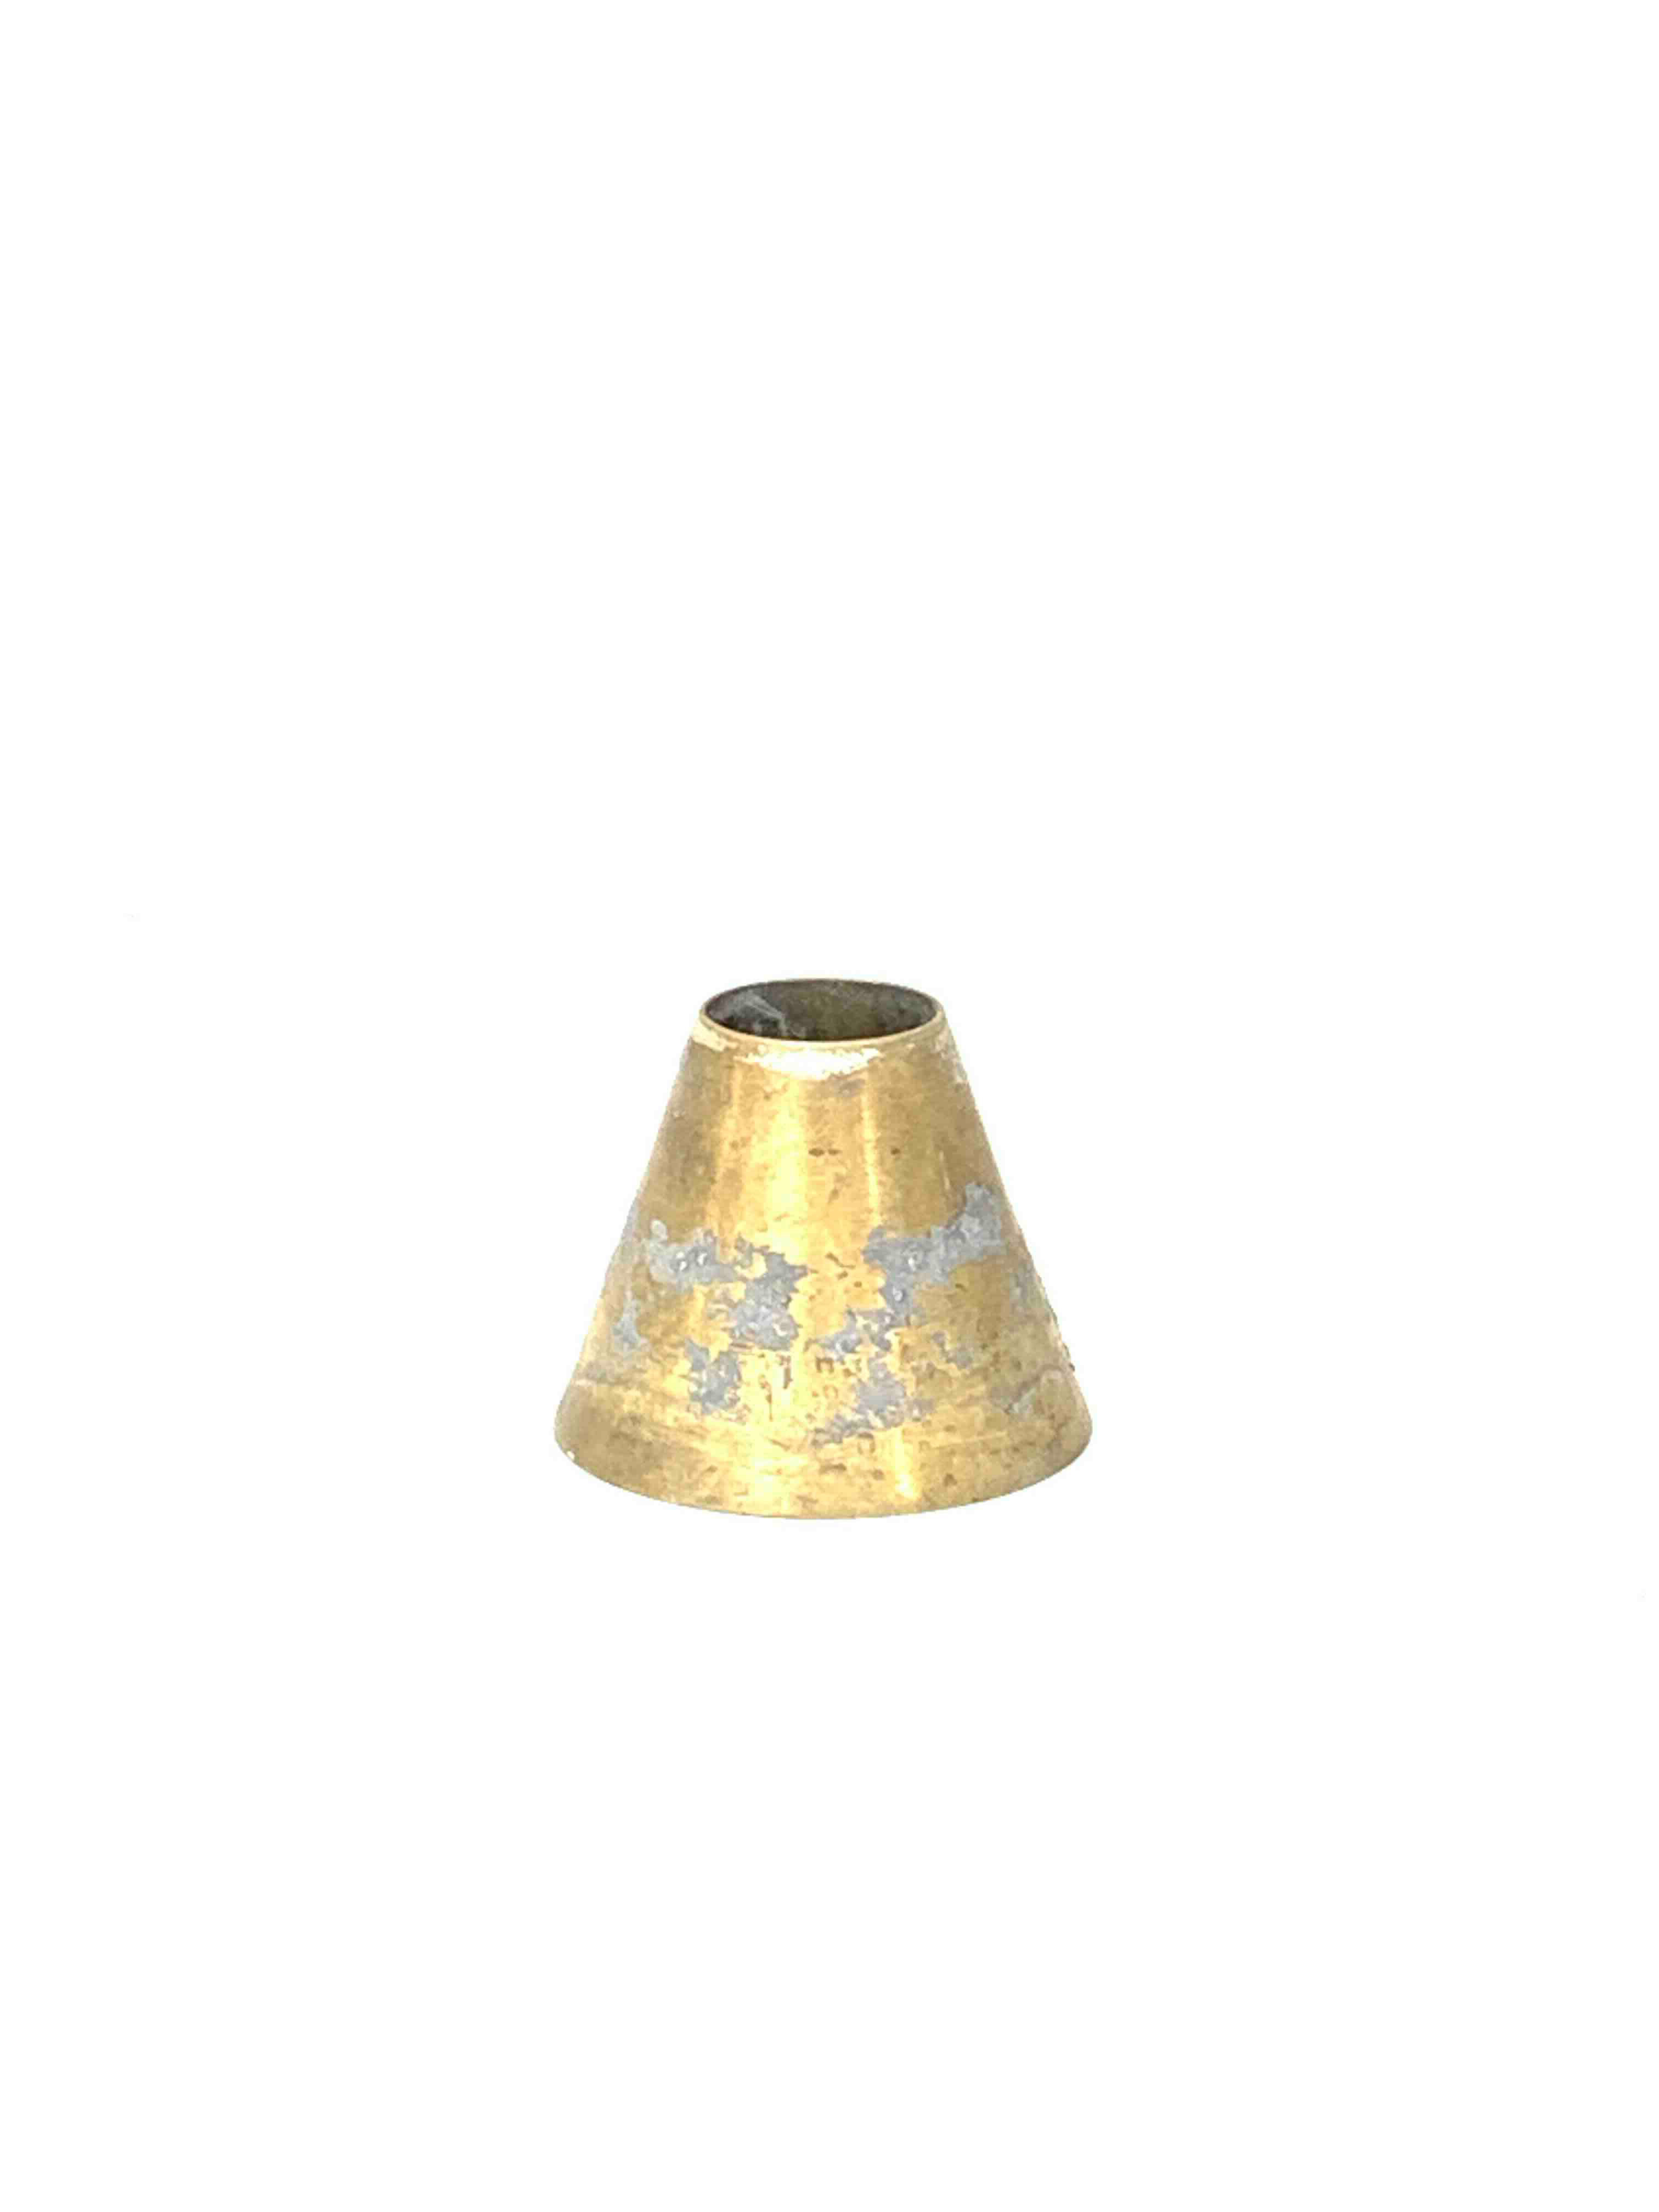 Conical Mold 